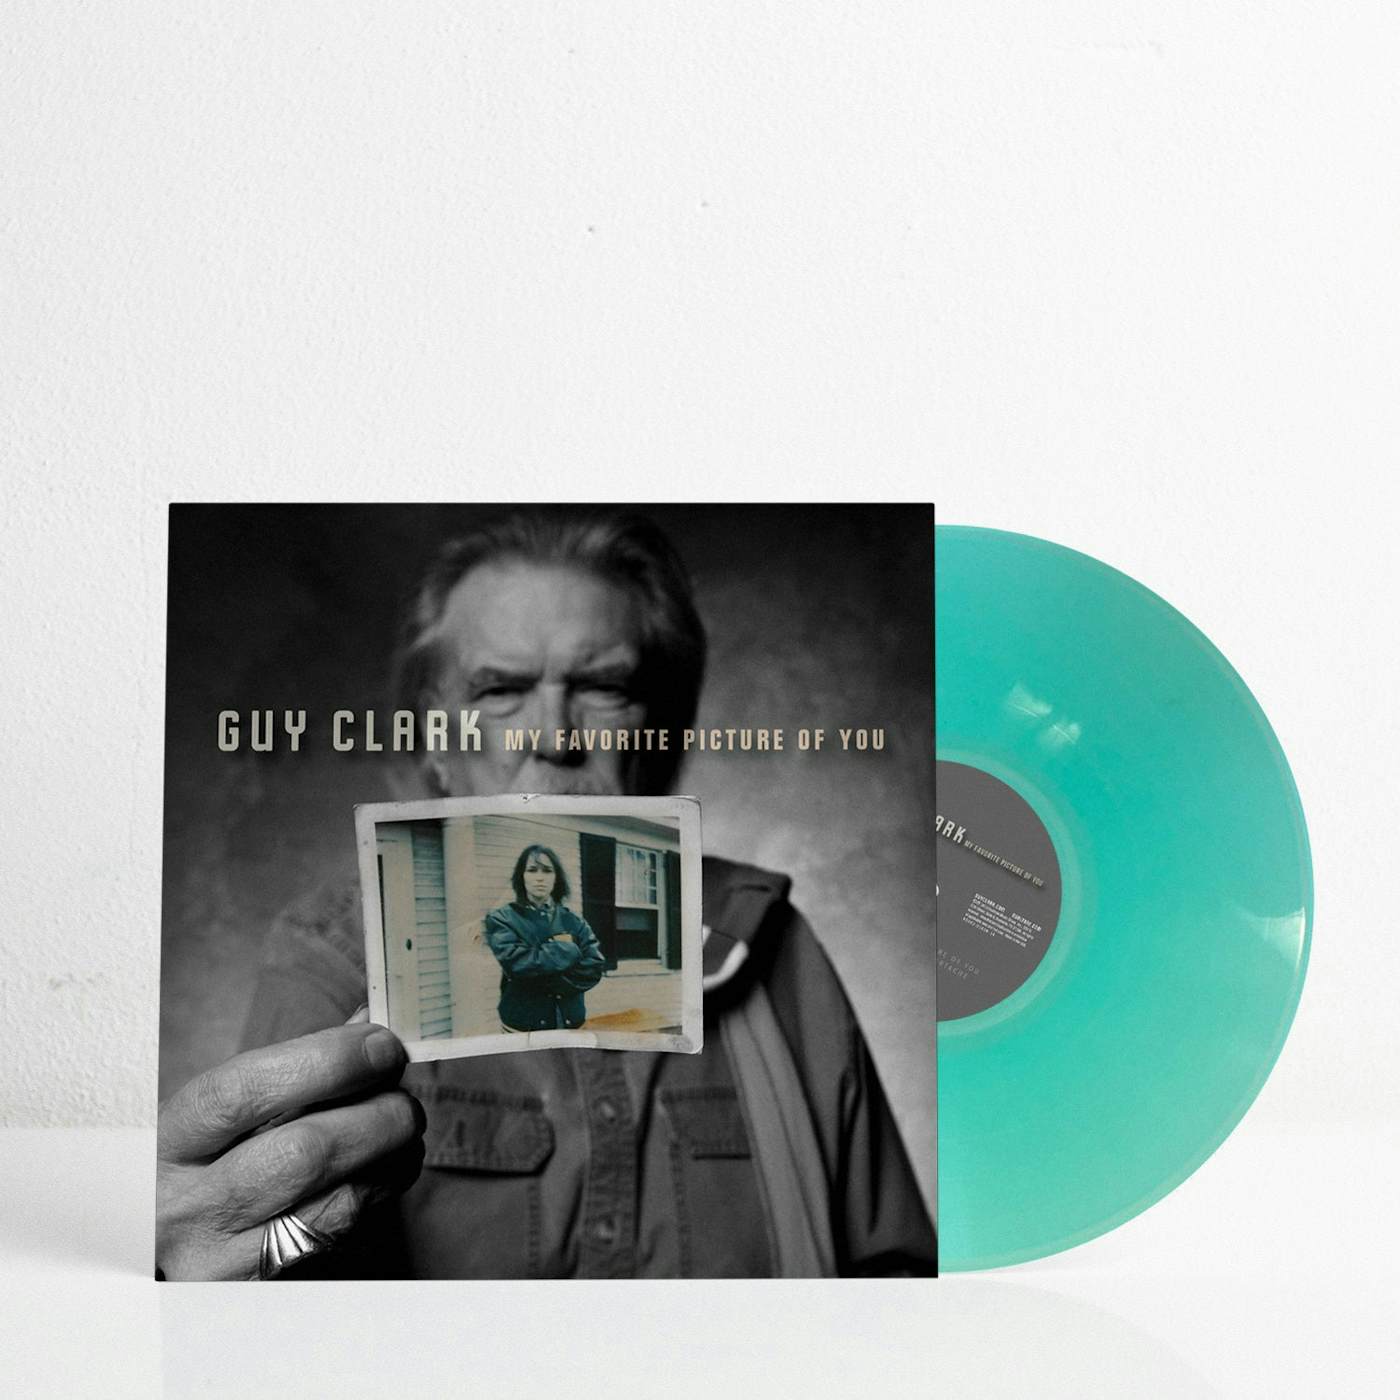 Guy Clark My Favorite Picture Of You (Ltd. Edition Sea Glass) (Vinyl)